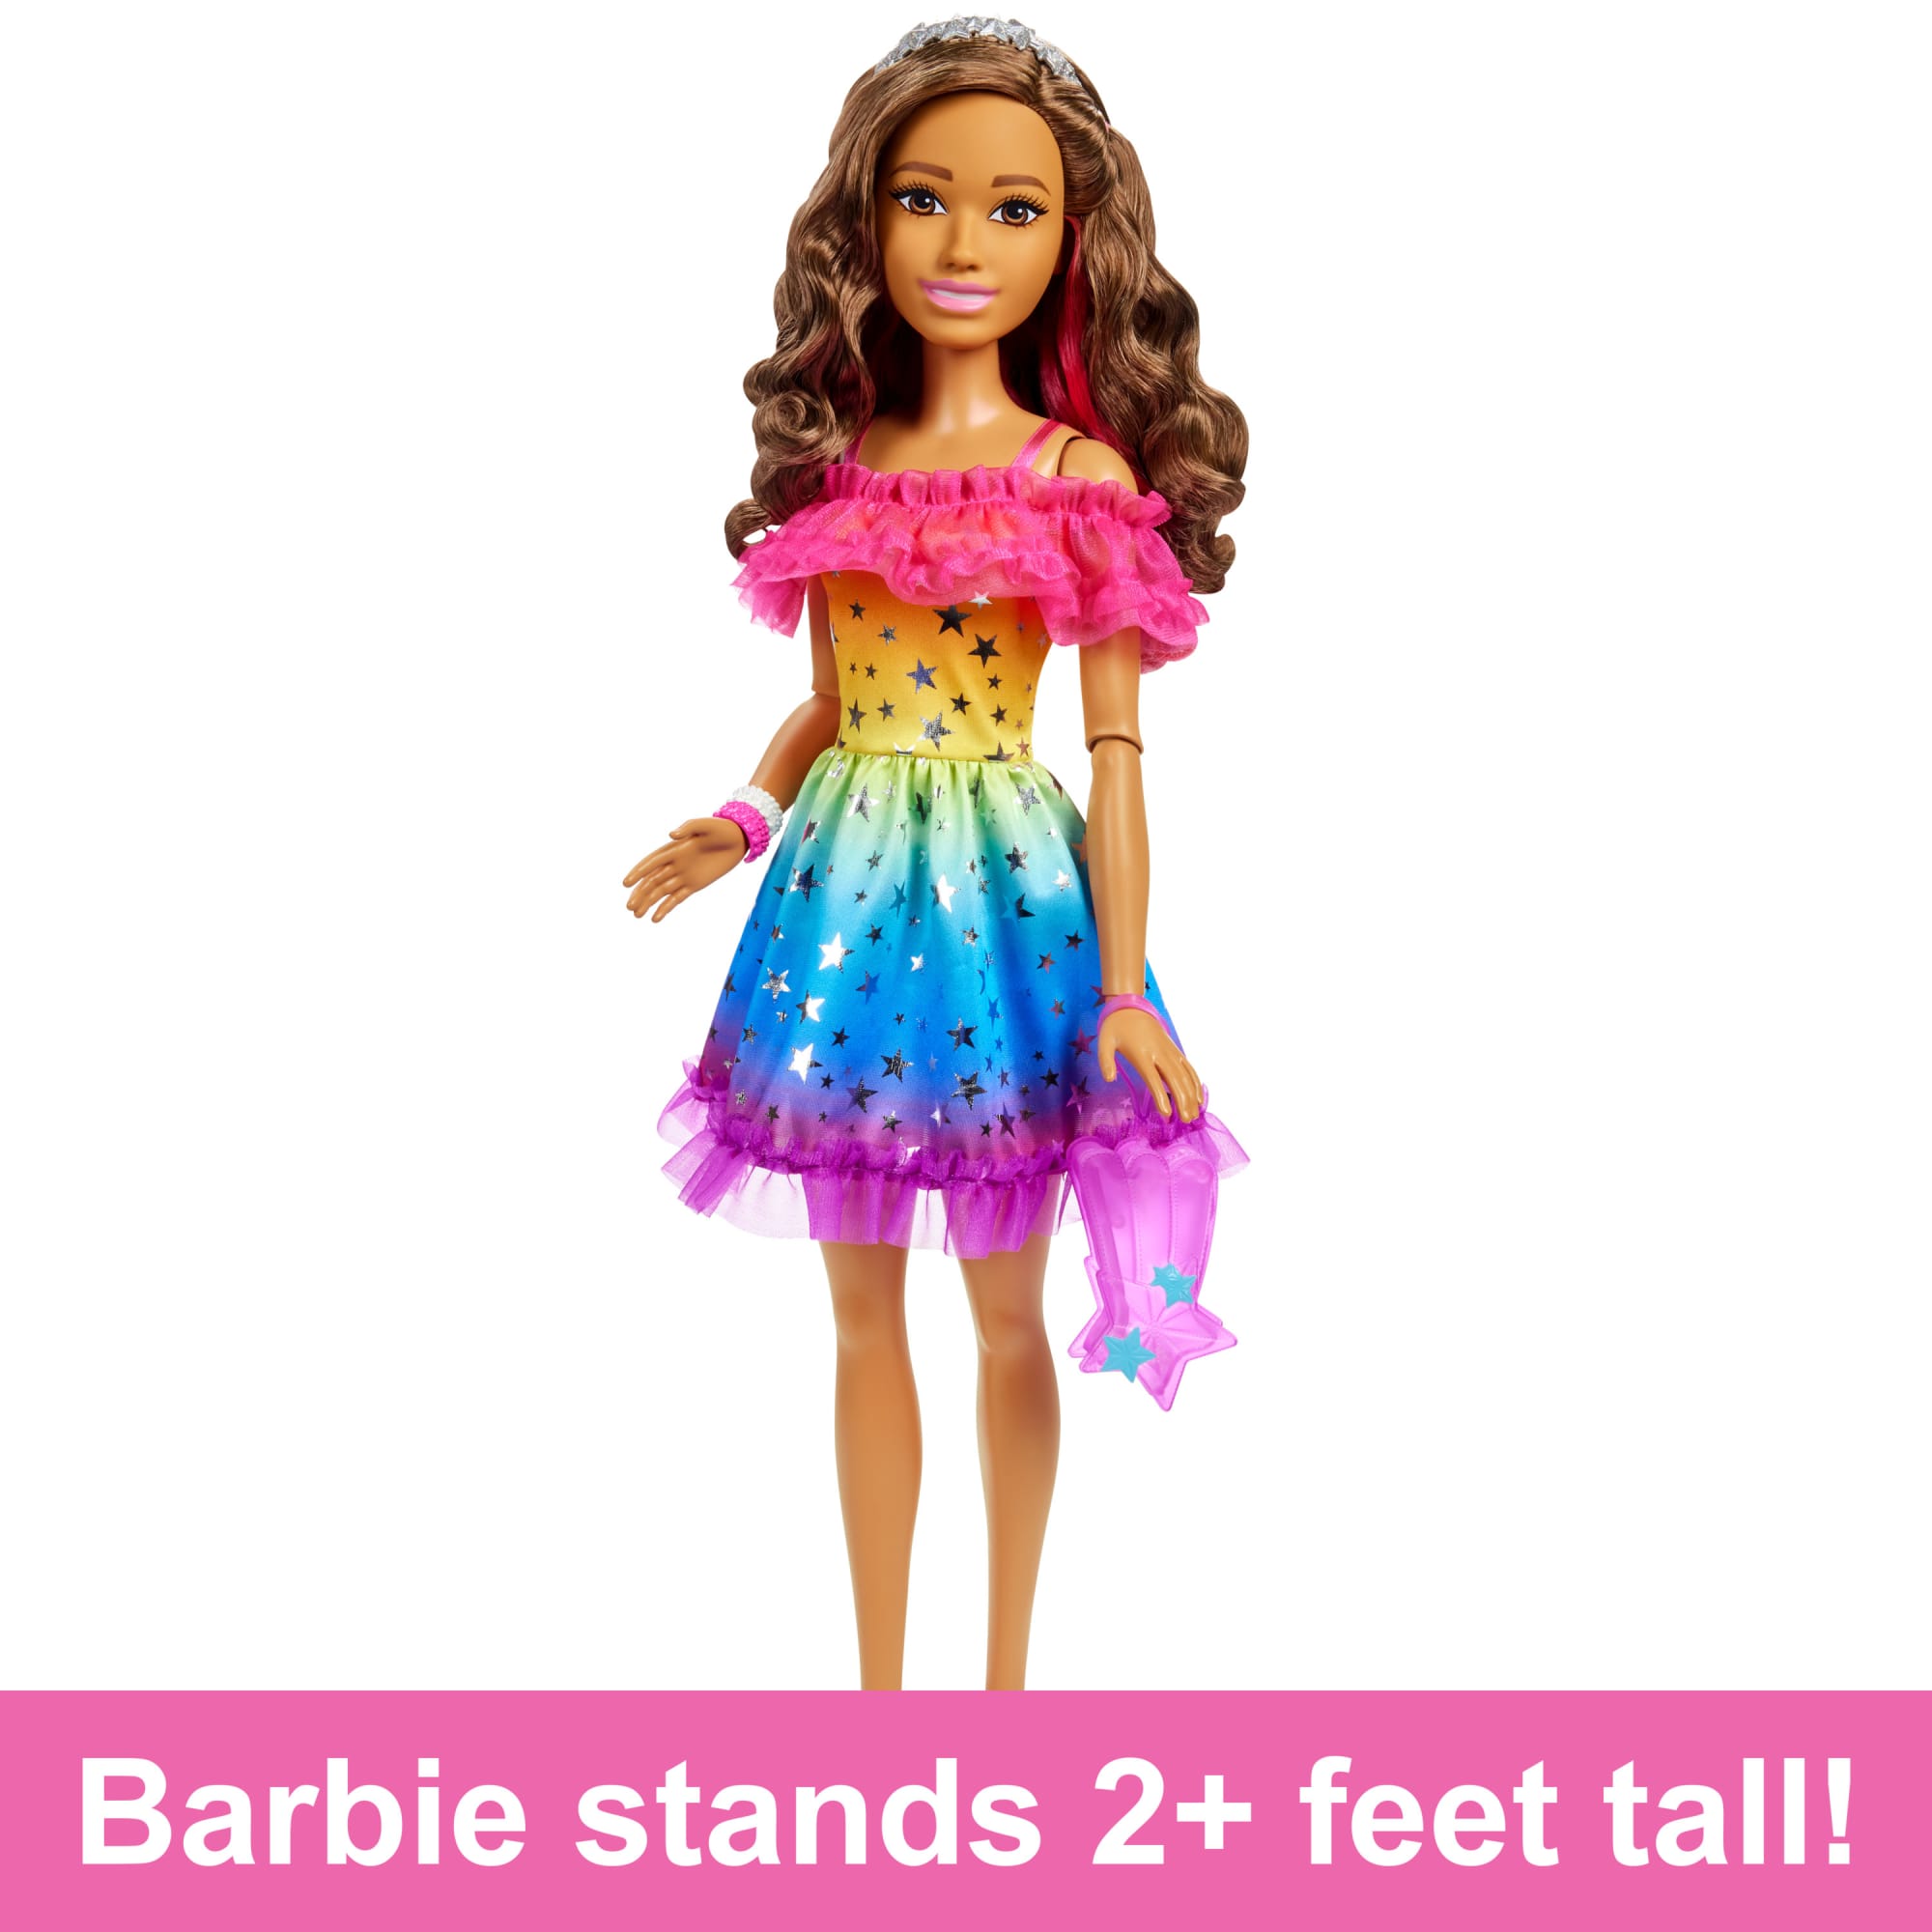 HAPPY TOYS & GAMES Doll Toy for Girl, Small Doll & Five Multicolor Very  Beautiful Dresses - Doll Toy for Girl, Small Doll & Five Multicolor Very  Beautiful Dresses . Buy Fashion